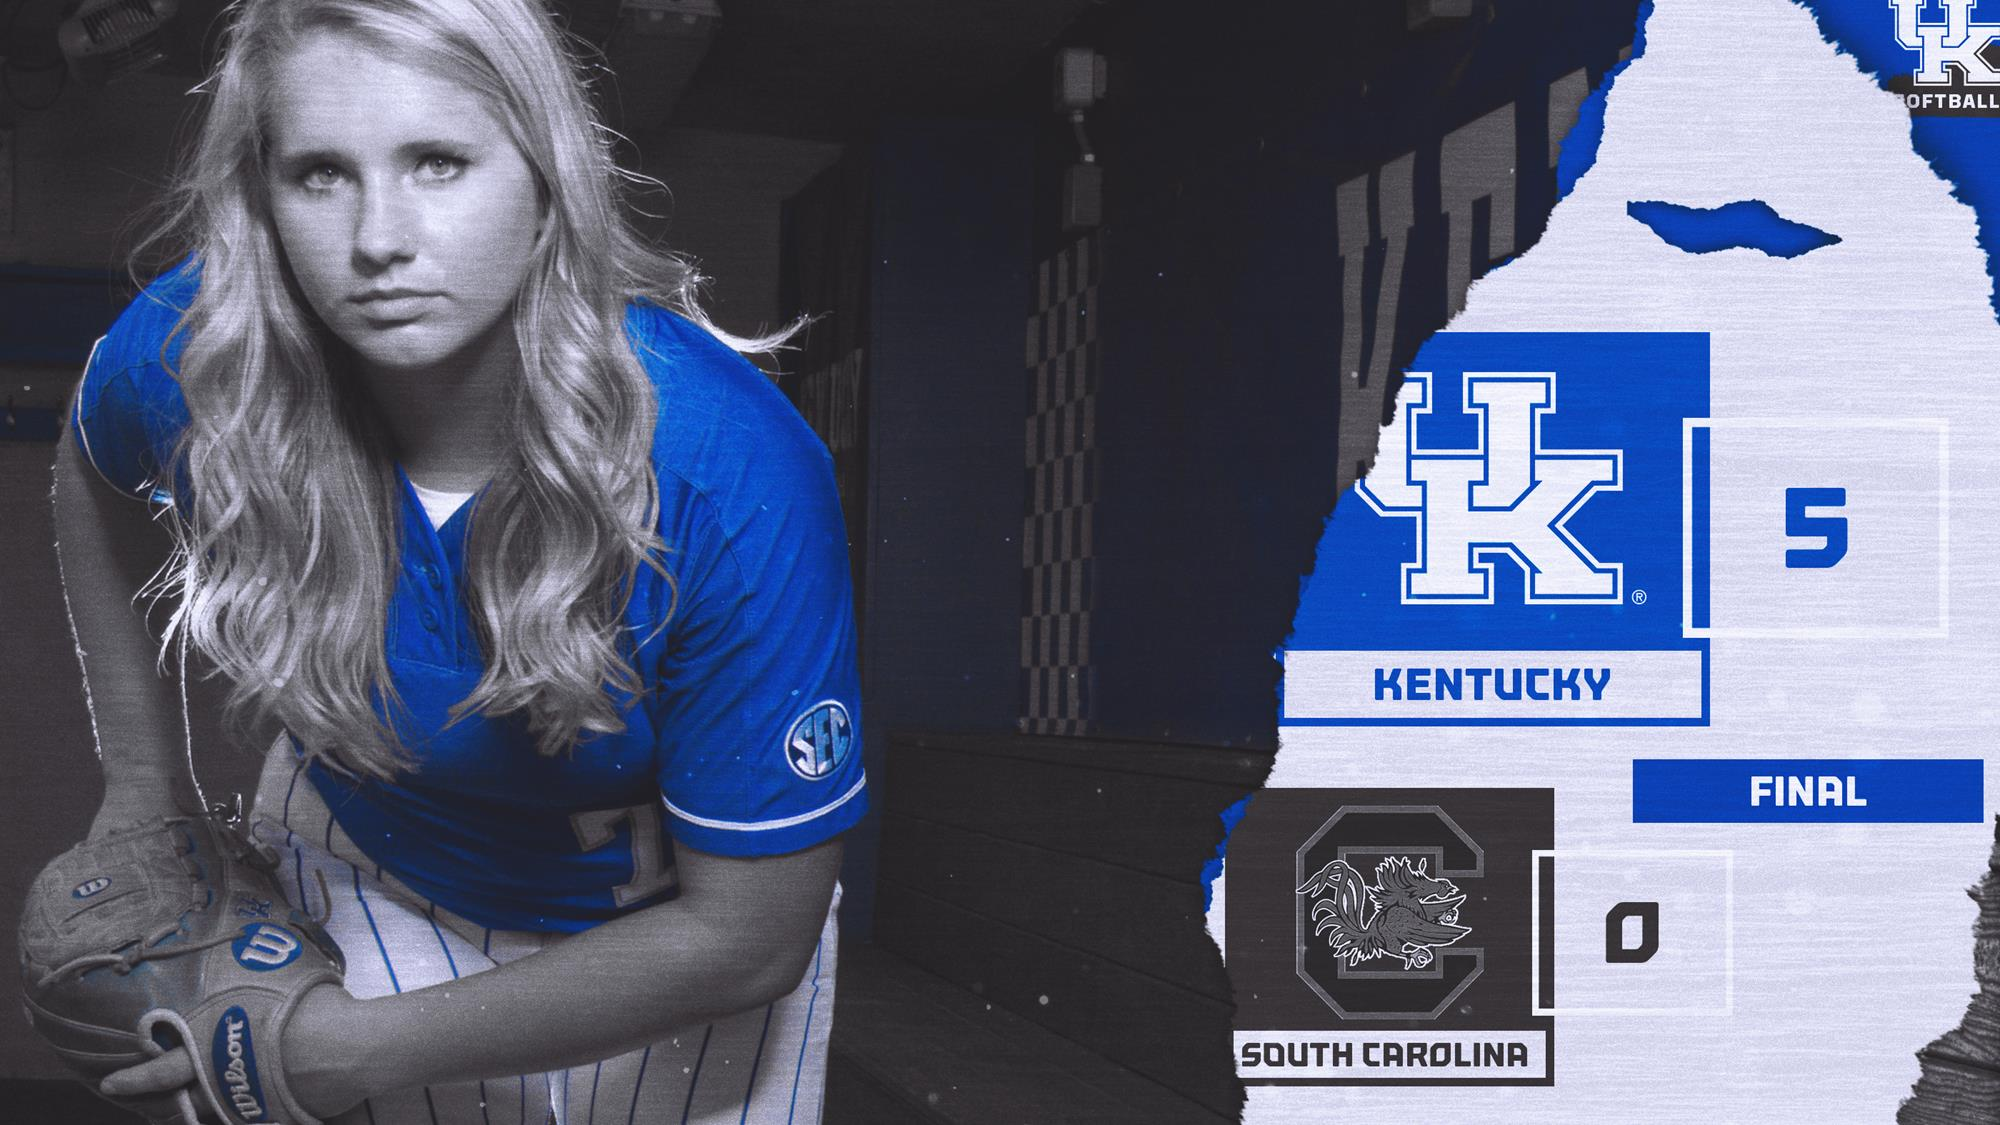 Humes Sparkles In Shutout as No. 18 Kentucky Wins SEC Opener